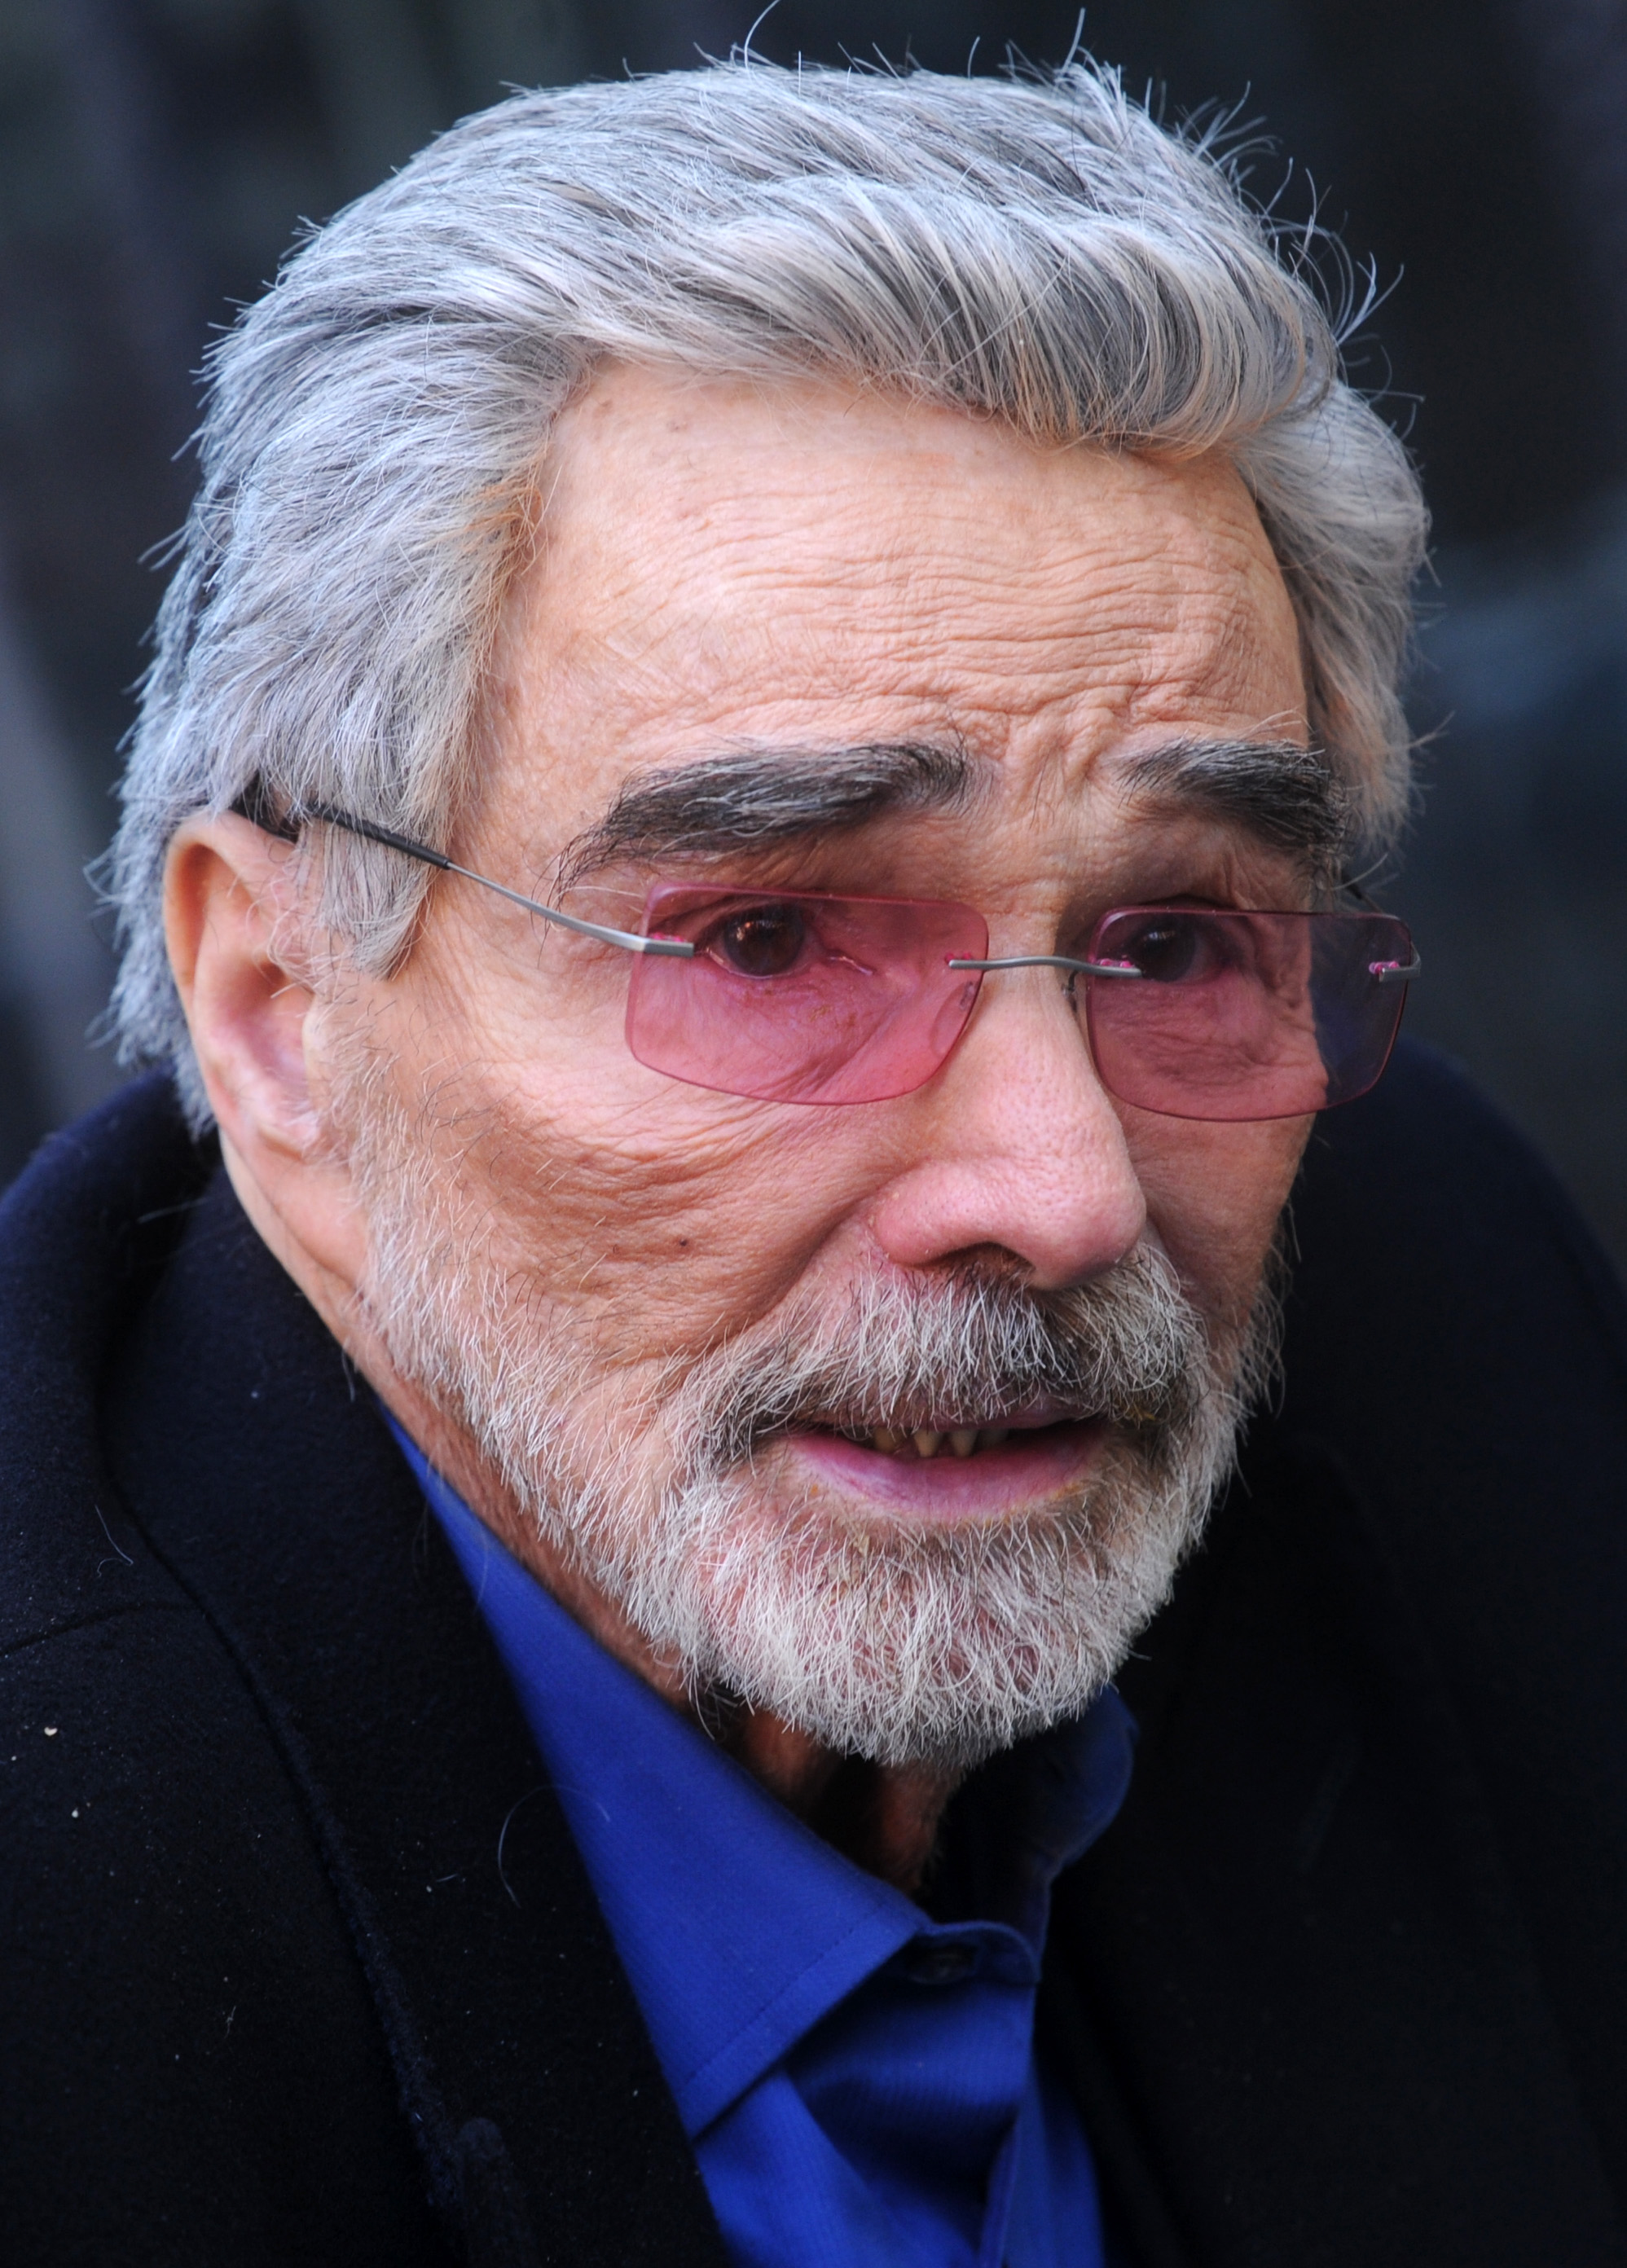 Burt Reynolds in New York in 2018 | Source: Getty Images